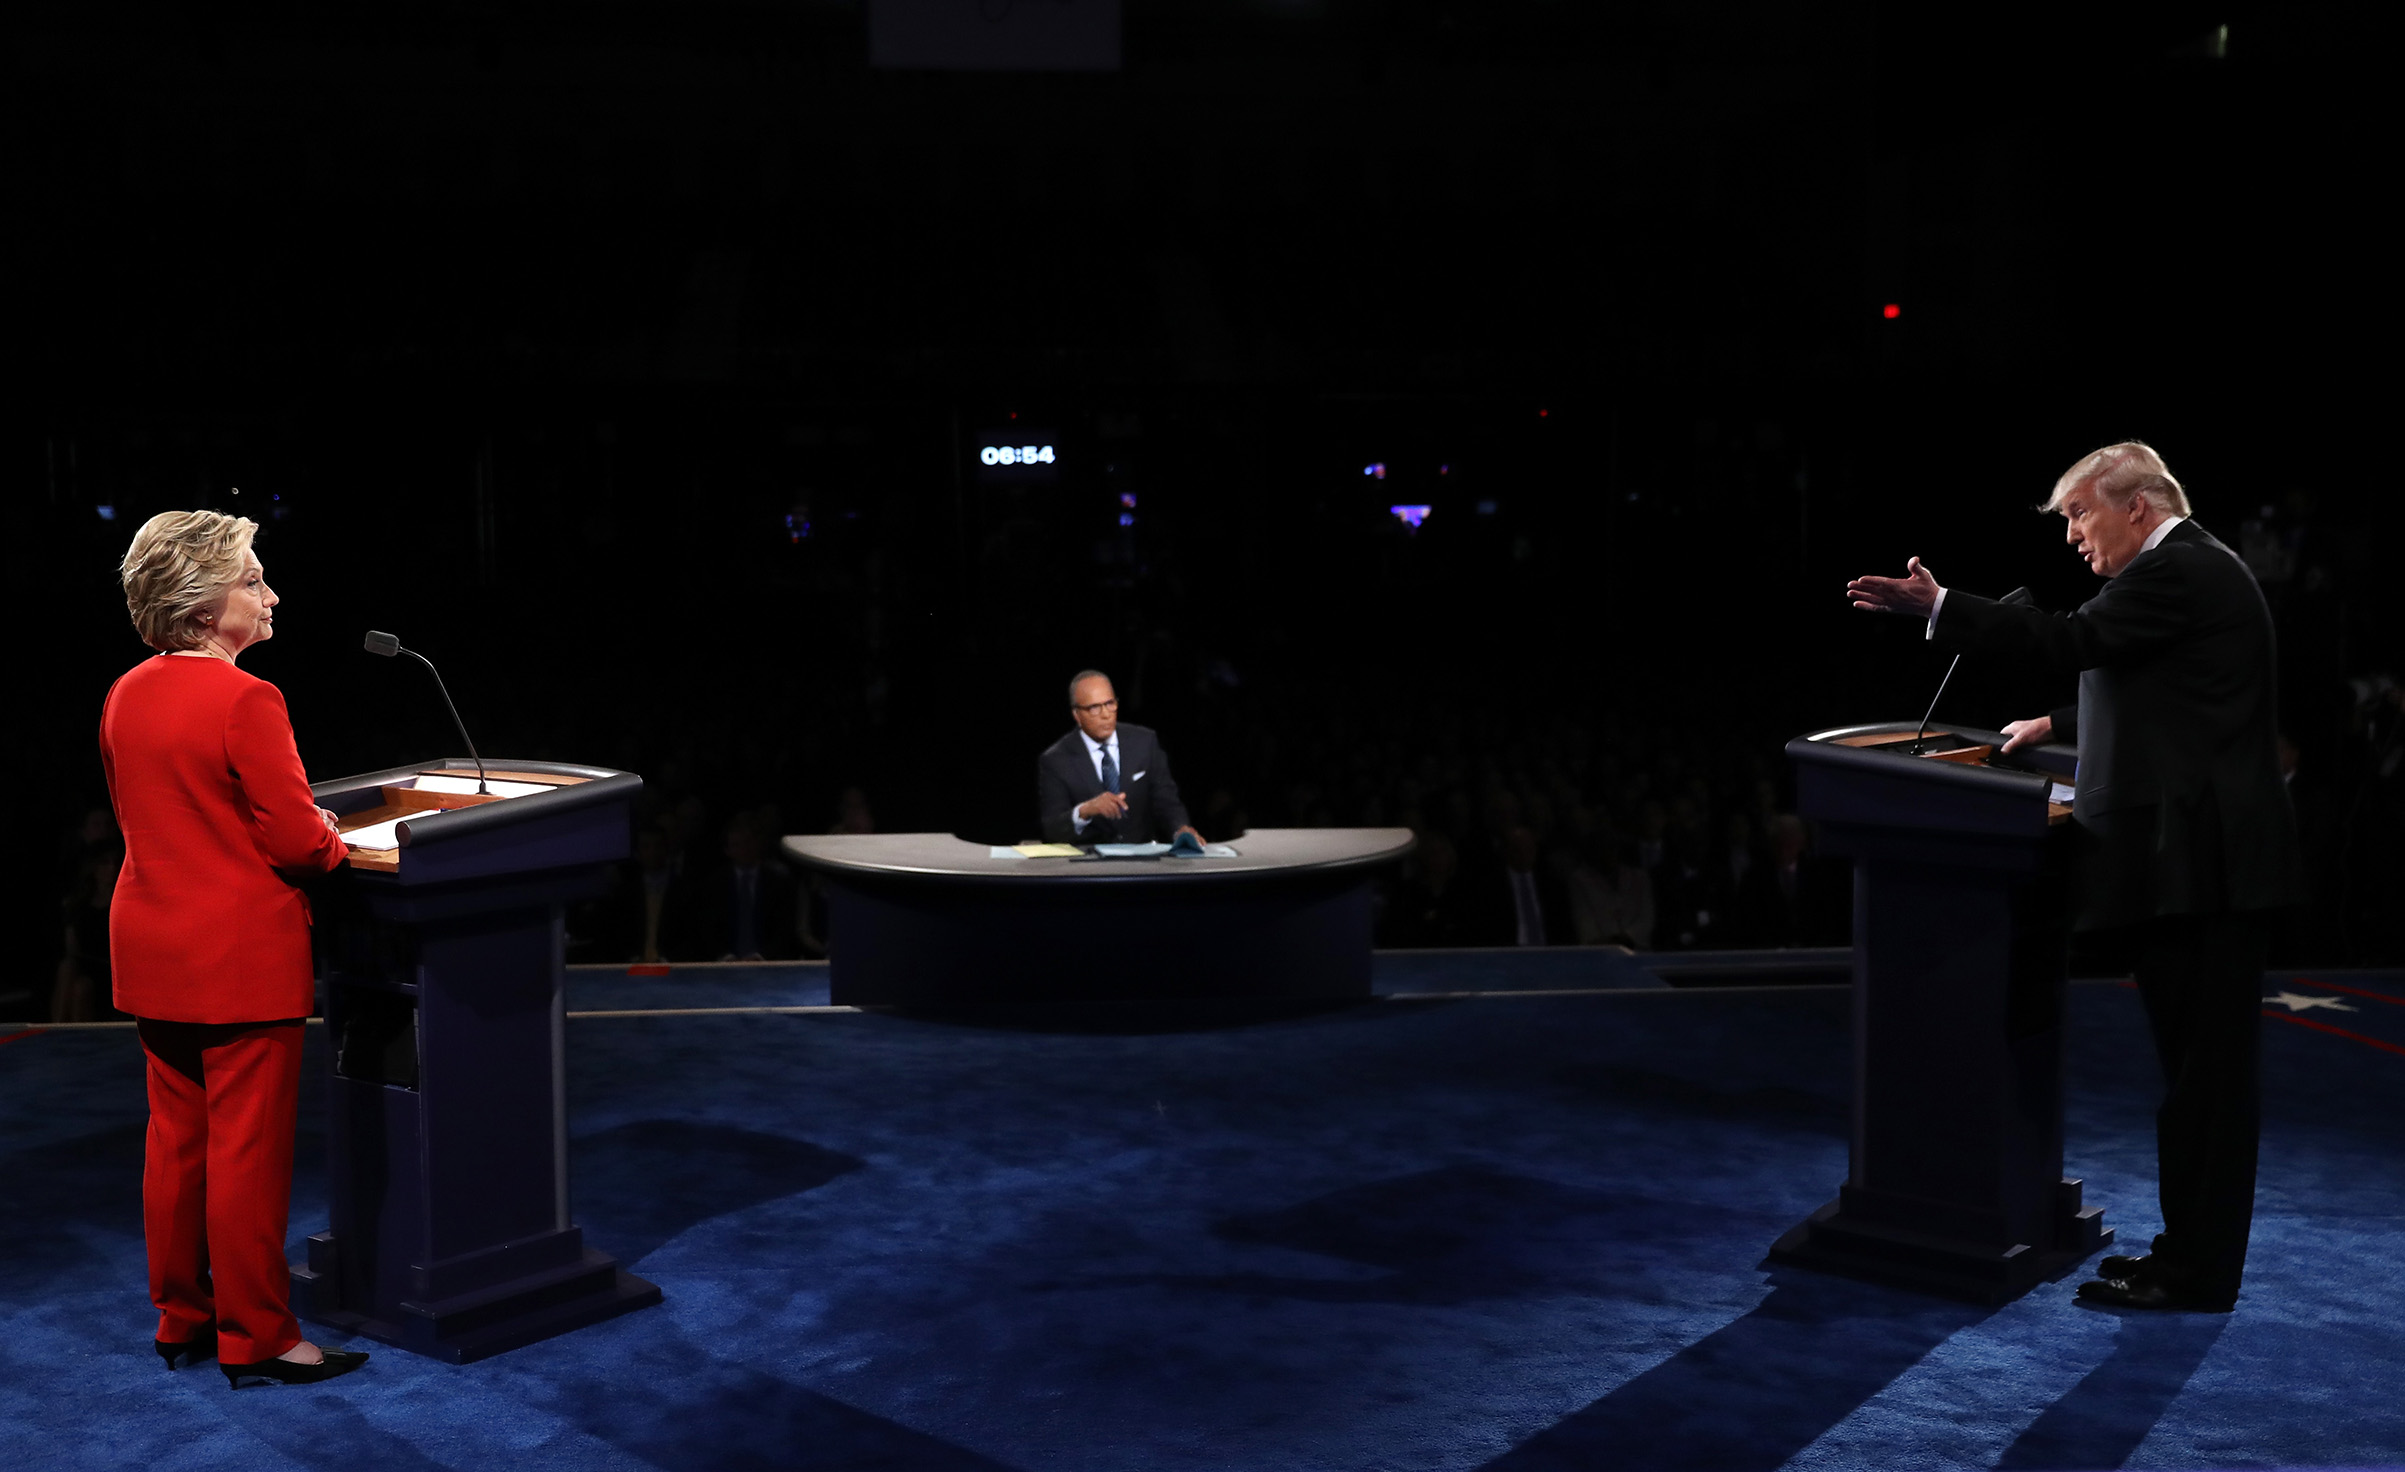 Republican presidential nominee Donald Trump speaks as Democratic presidential nominee Hillary Clinton and Moderator Lester Holt listens during the Presidential Debate at Hofstra University on Sept. 26, 2016. (Joe Raedle—Getty Images)